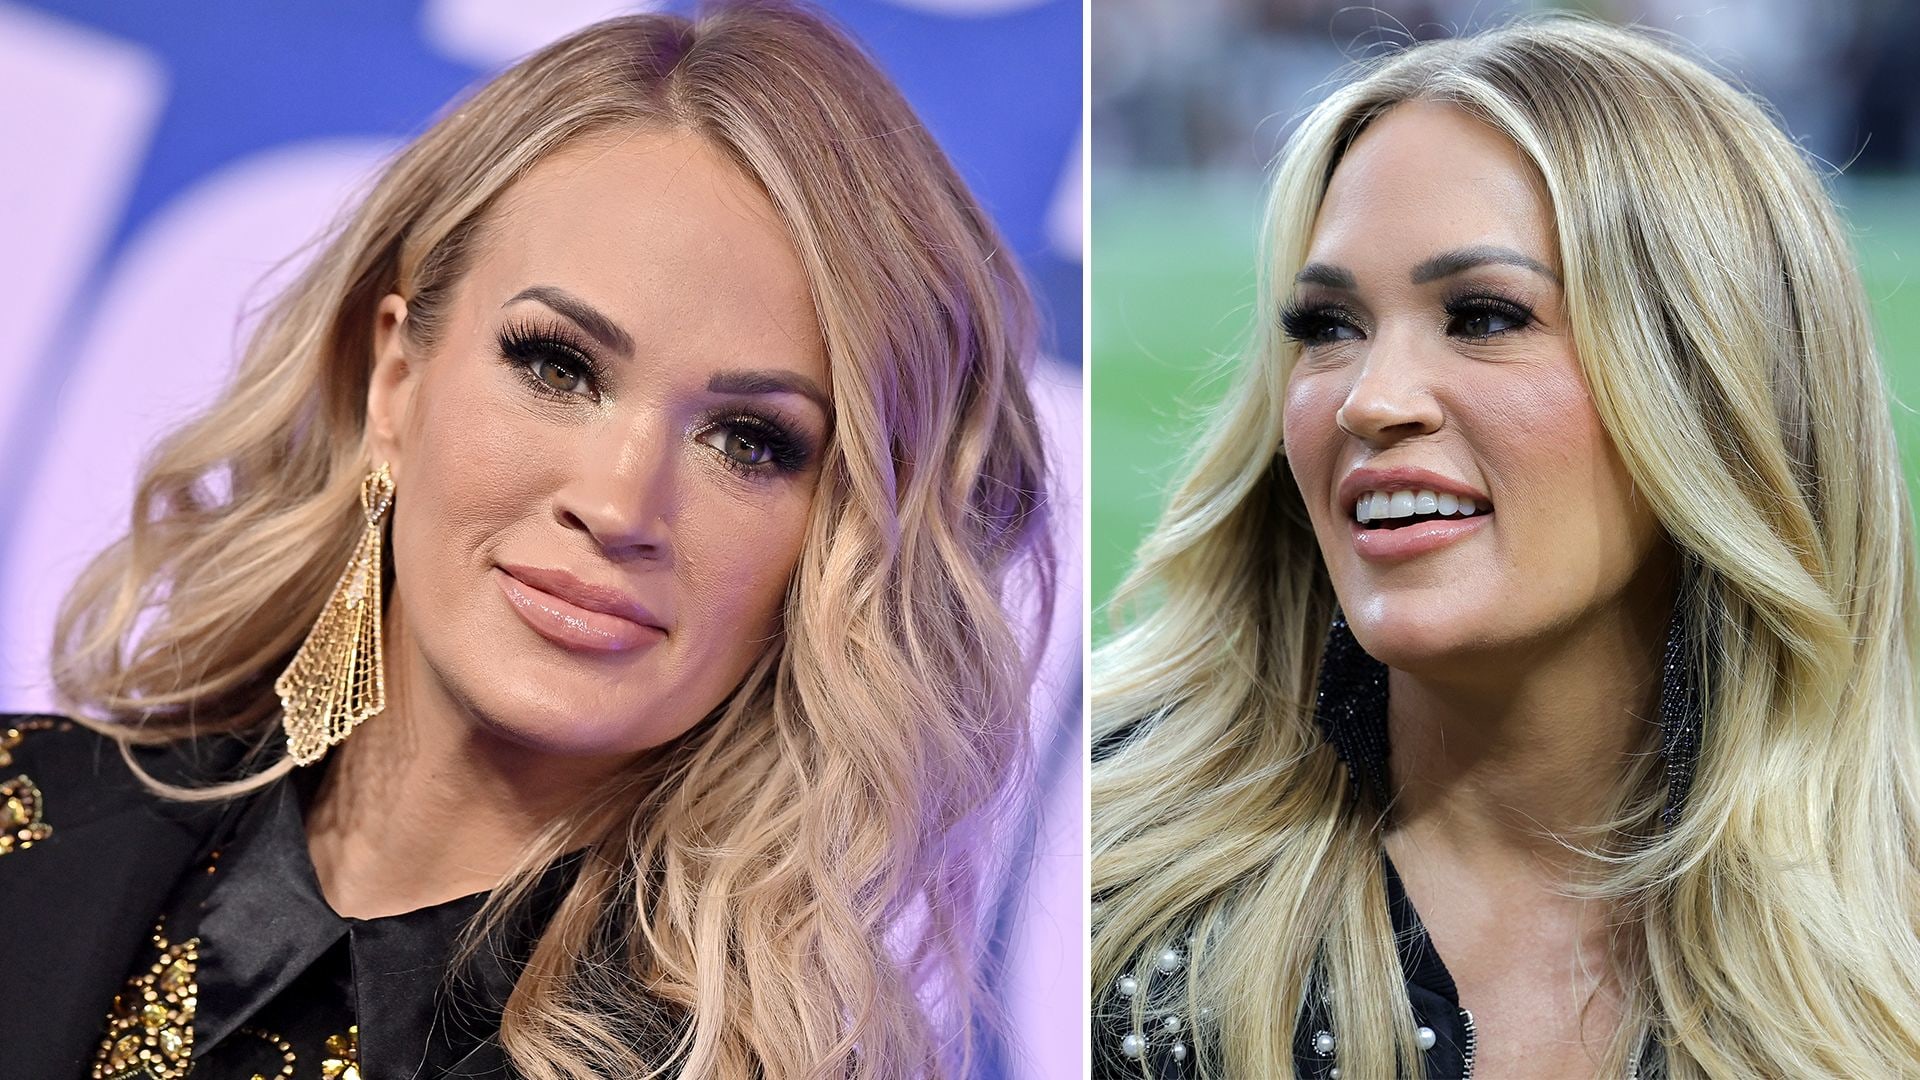 Carrie Underwood plastic surgery what has she had done? HELLO!